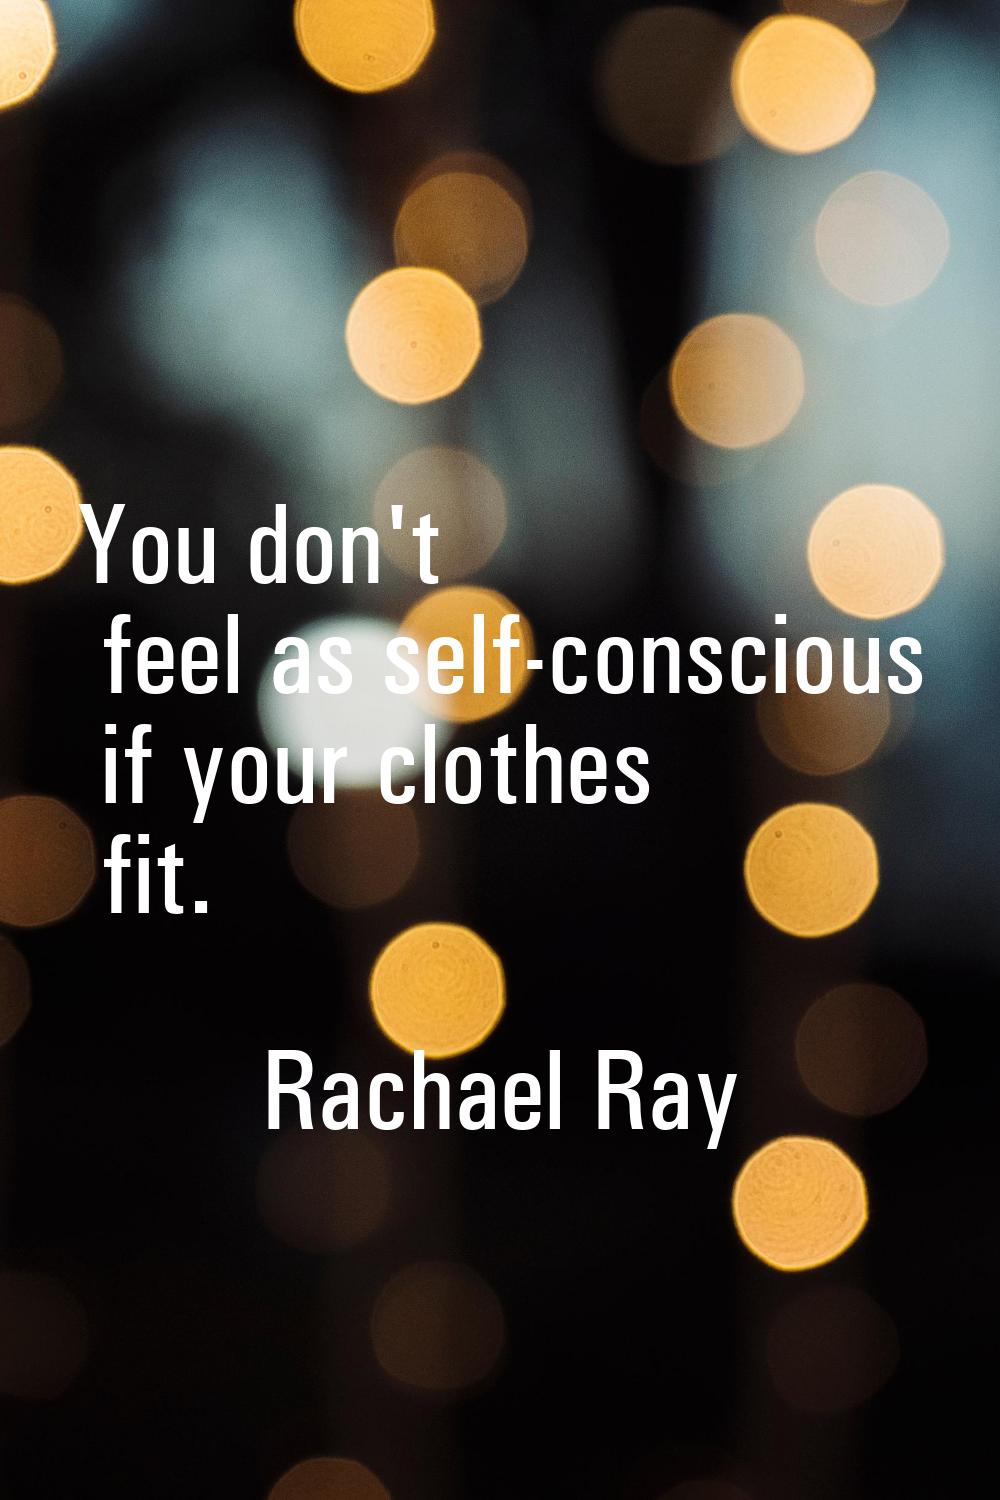 You don't feel as self-conscious if your clothes fit.